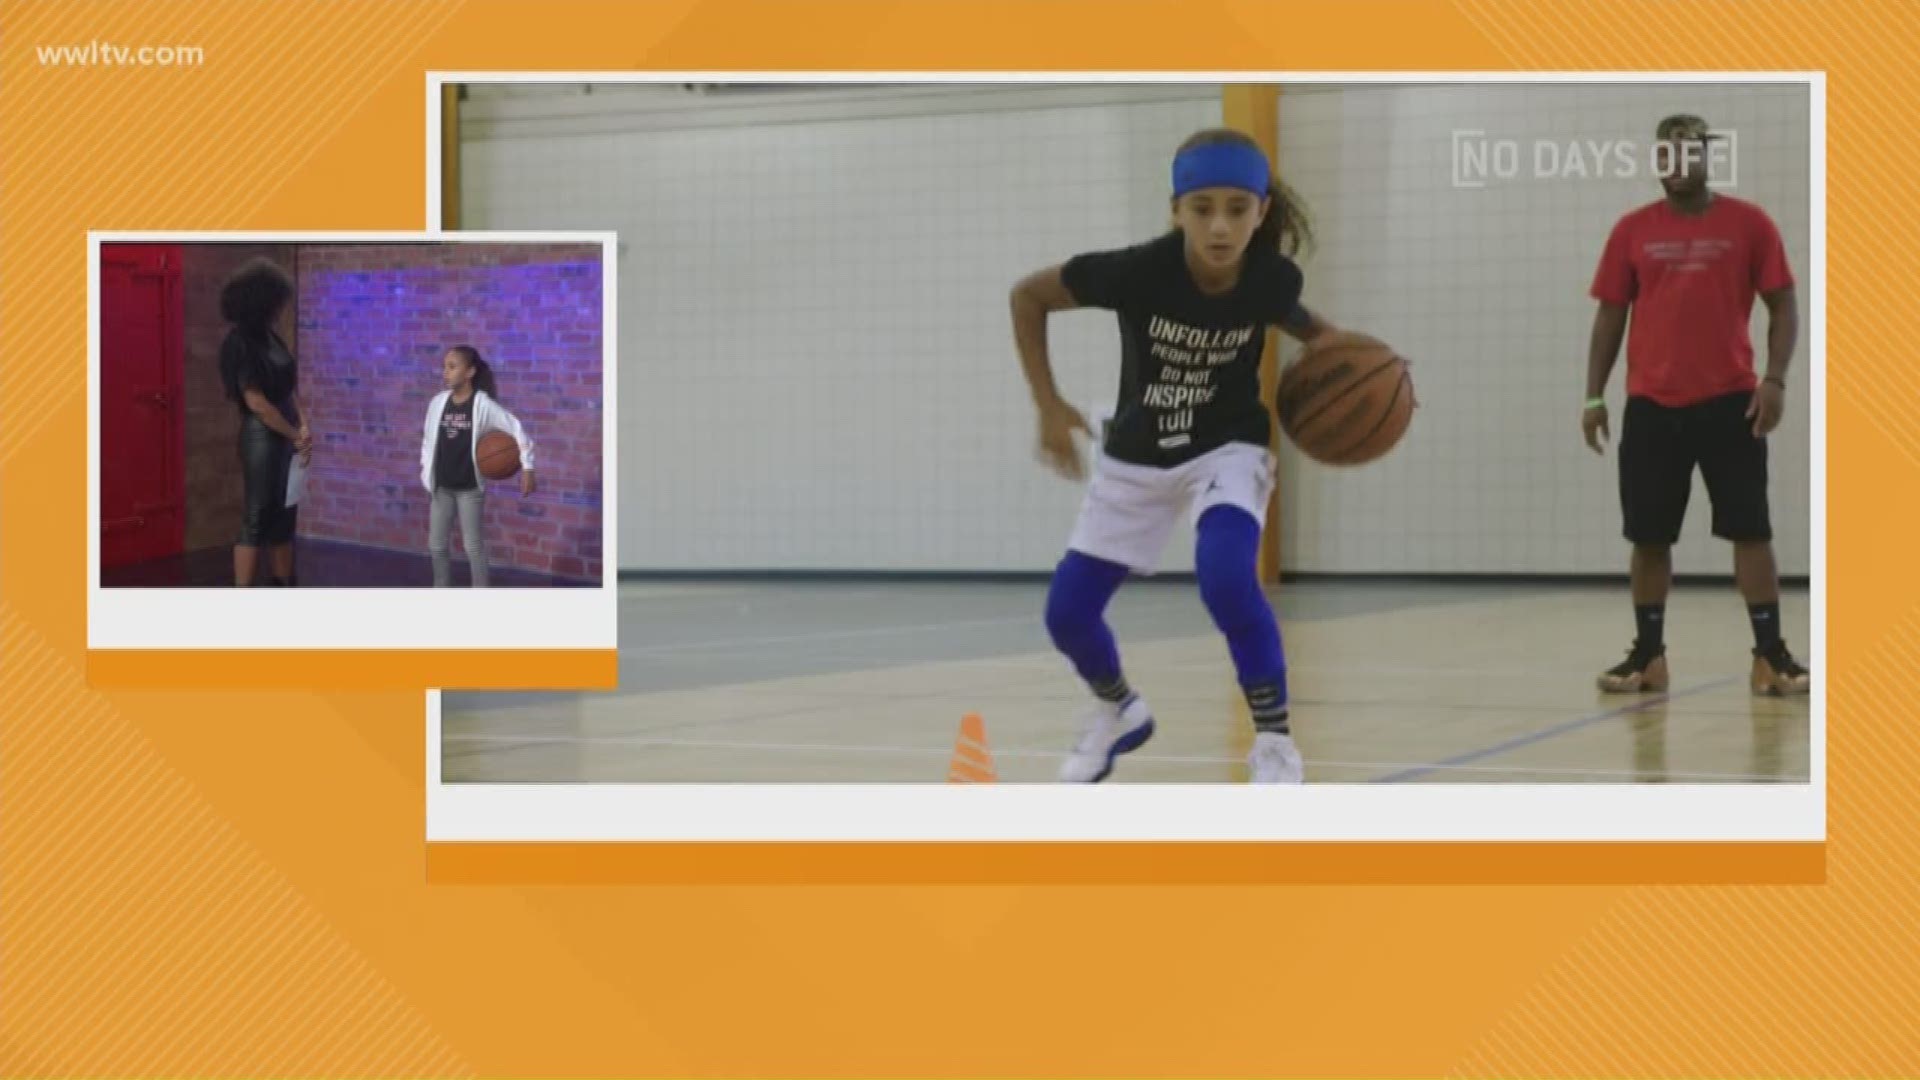 Sheba talks to Basketball prodigy Jaliyah Manuel about her love of the sport and what she hopes to accomplish with her talents. Watch her episode of the docuseries "No Days Off" here: https://www.youtube.com/watch?v=haNSxb3gT8U&t=0s&index=5&list=PL9TCweIMrgOceJazQMAYdB0b5GIYqbu_2